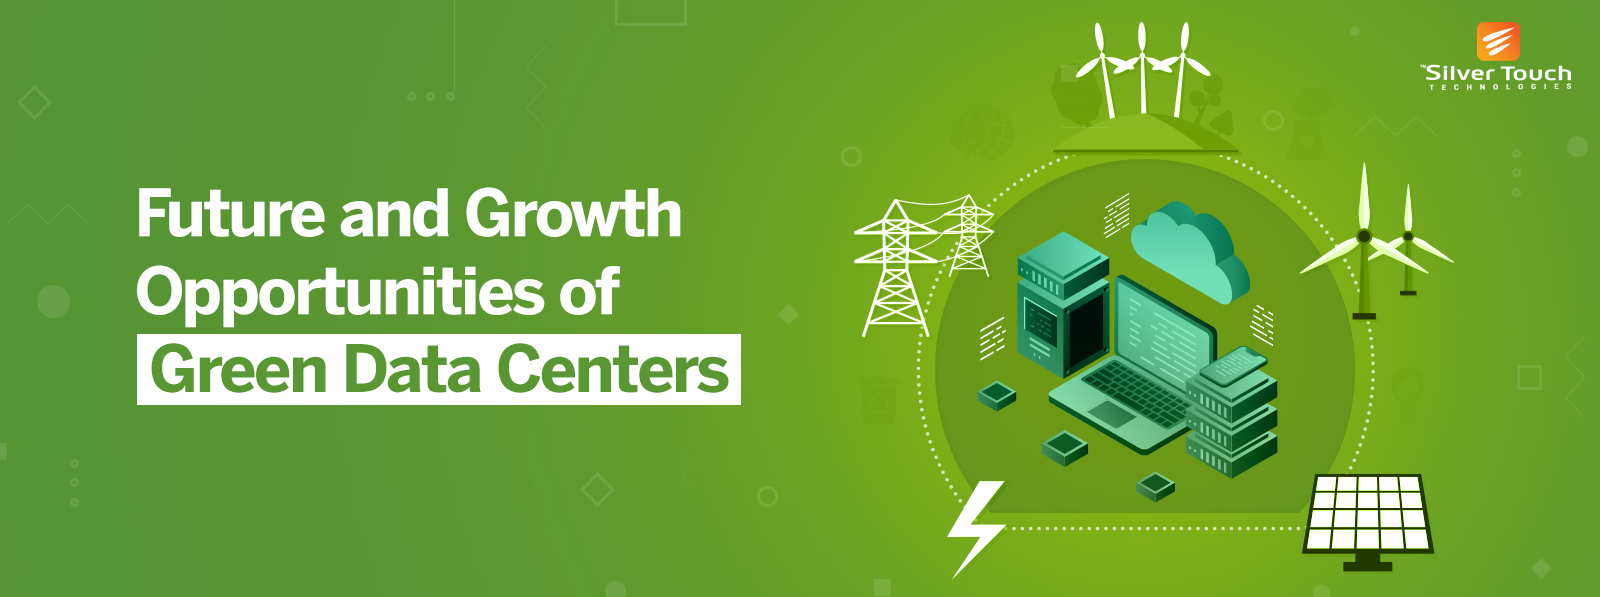 Future Growth Opportunities of Green Data Centers